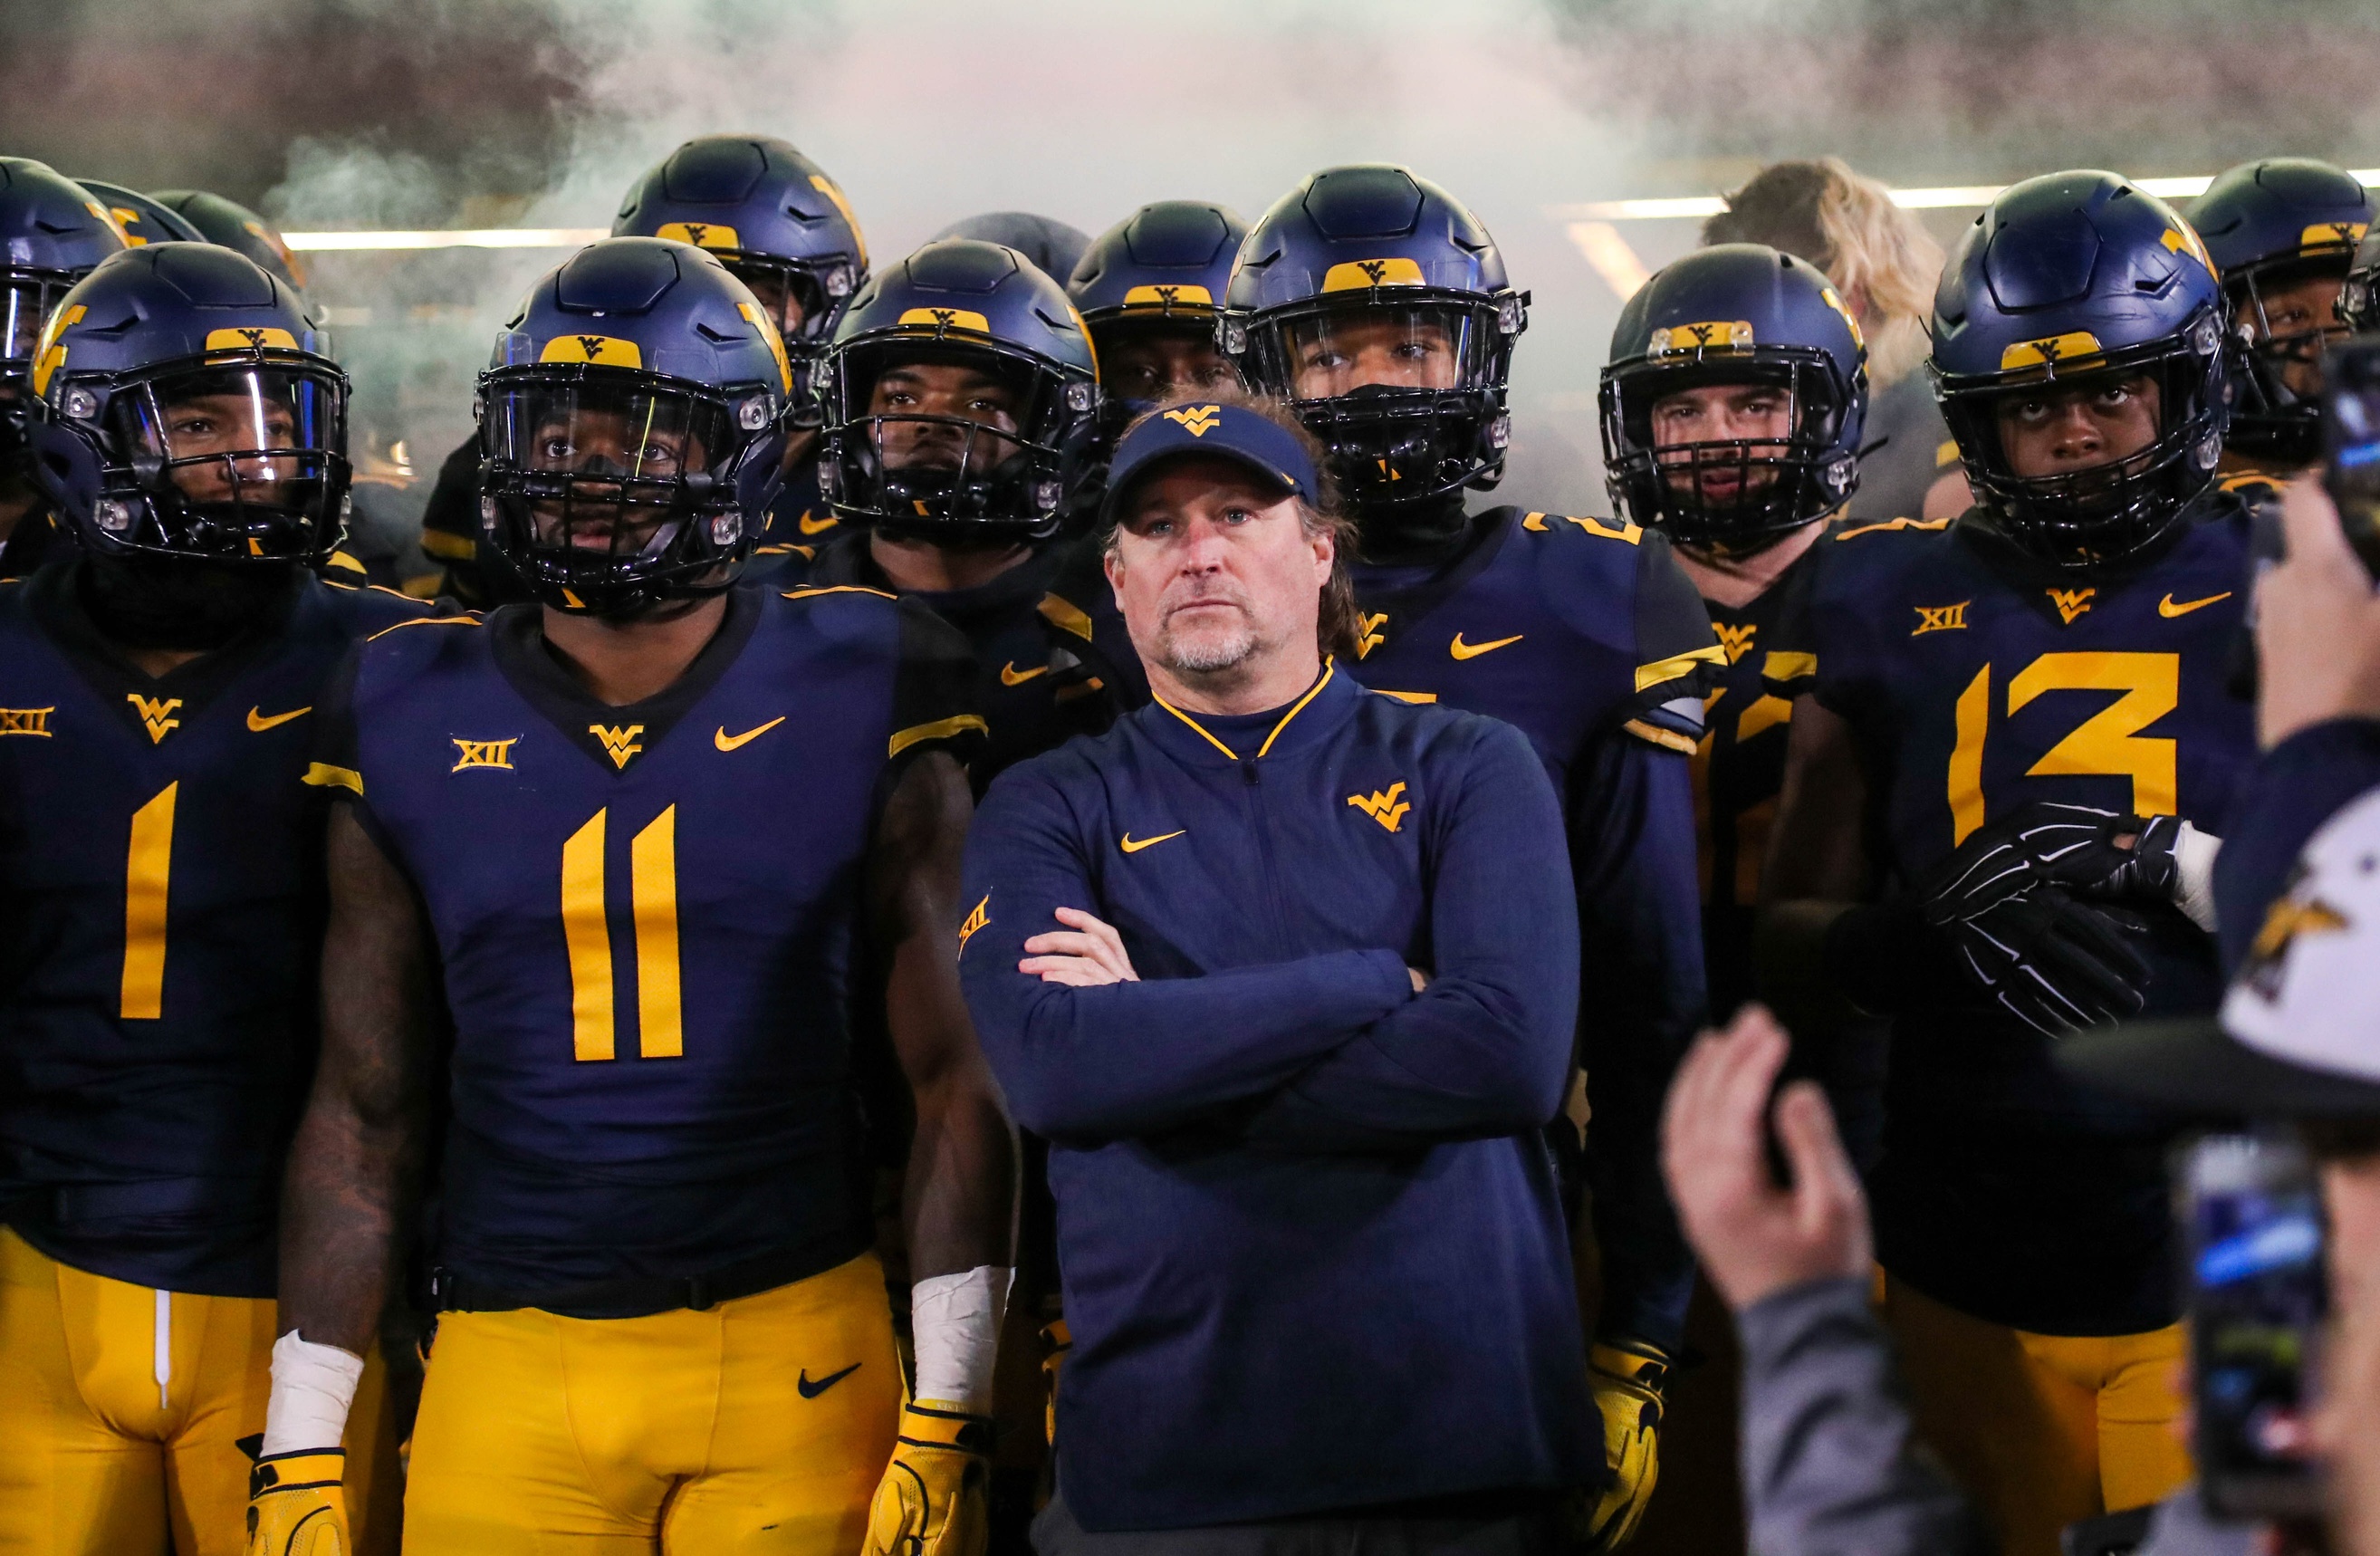 West Virginia Keeps Trolling Texas With Horns Down On Schedule